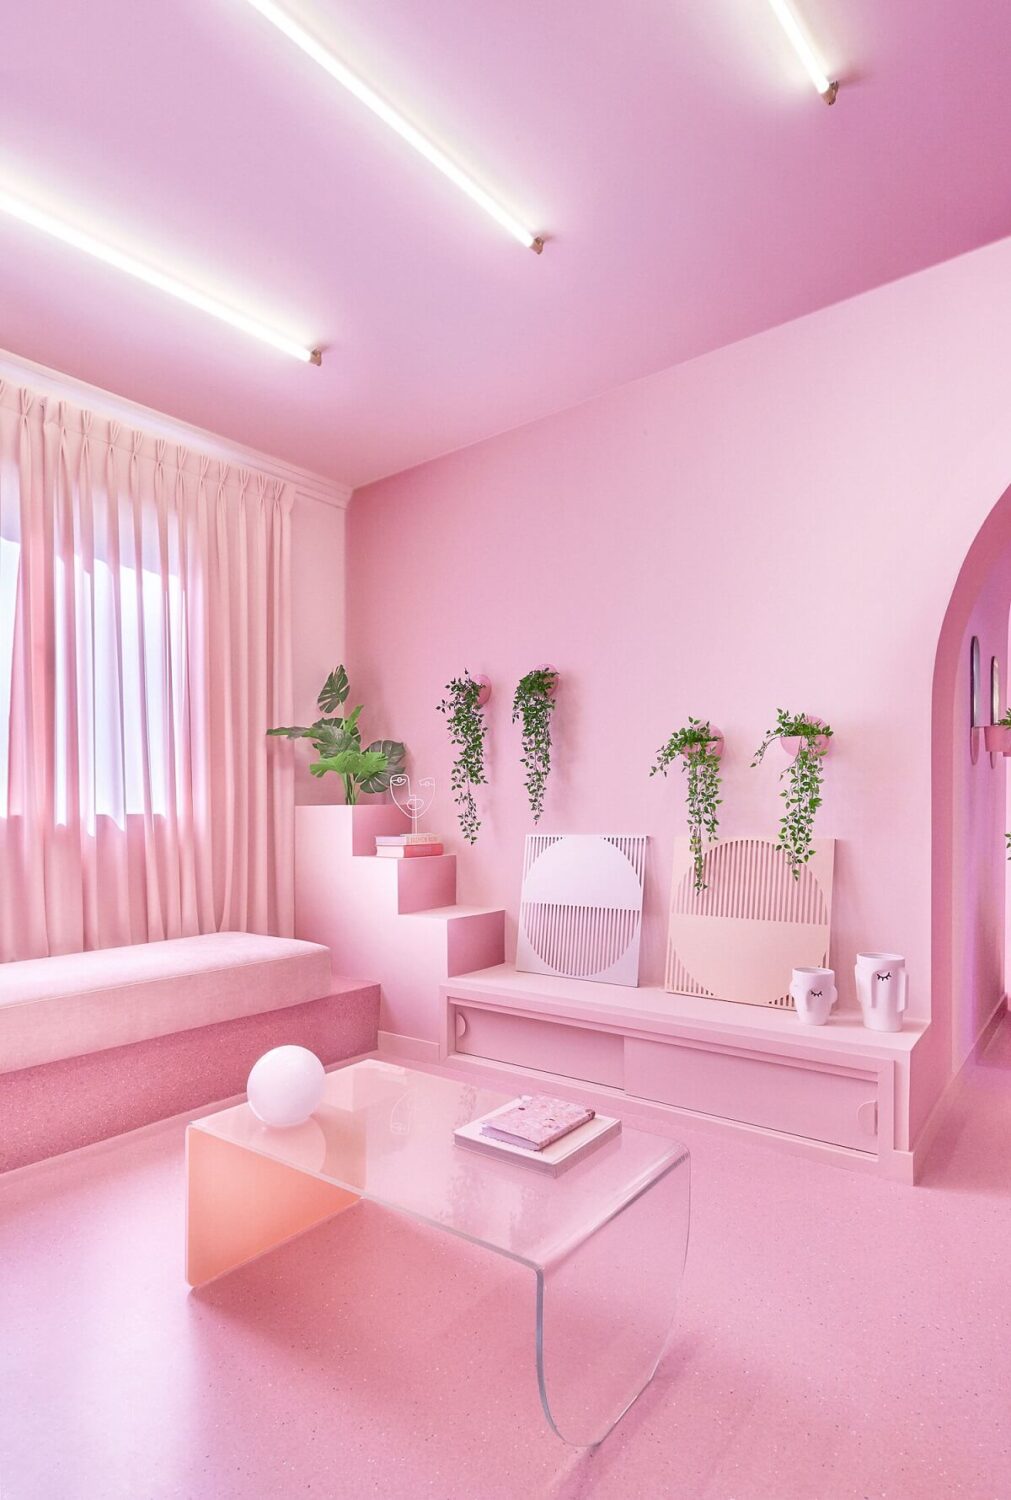 all-pink-living-room-barbiecore-interiors-nordroom